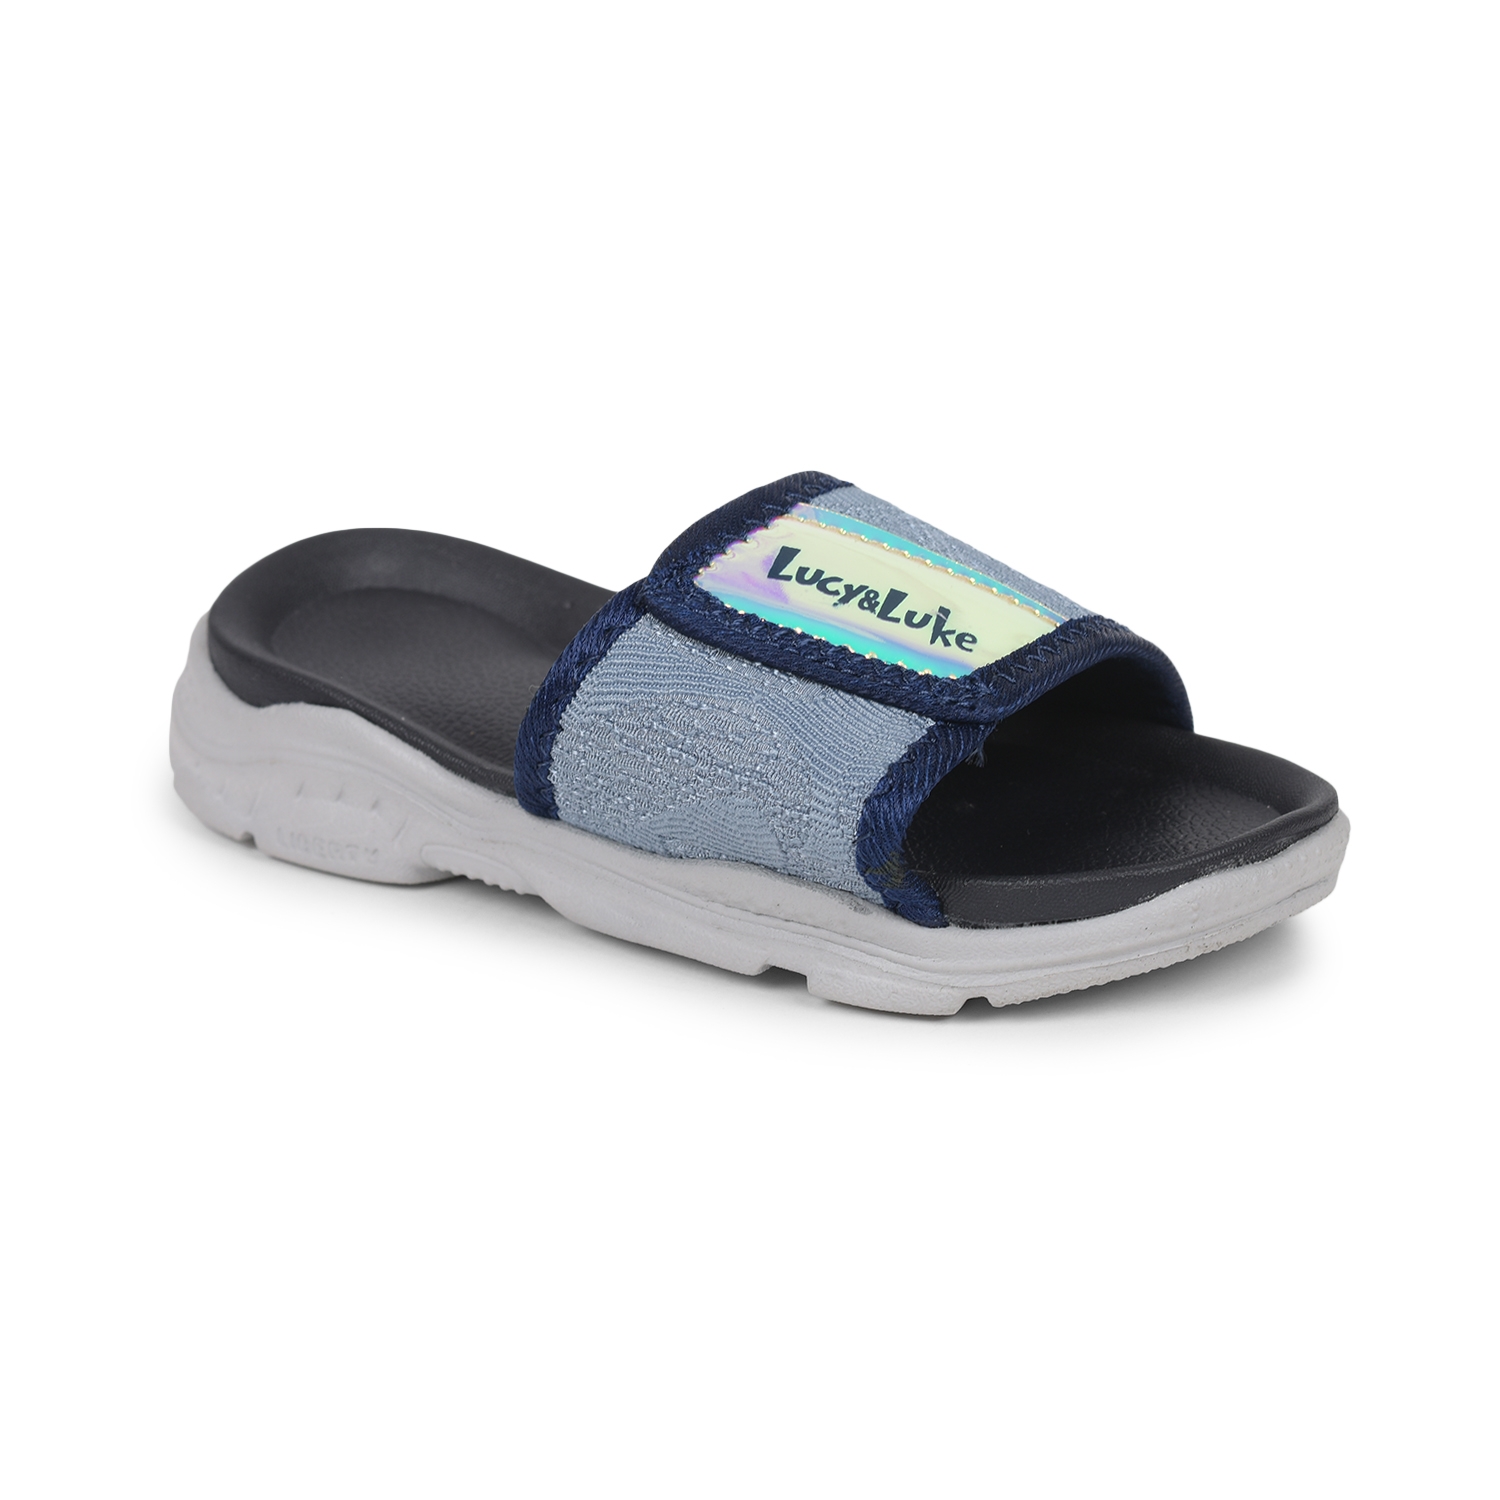 Liberty | Liberty Lucy & Luke S.BLUE Slippers RICKY-18 For :- Kids